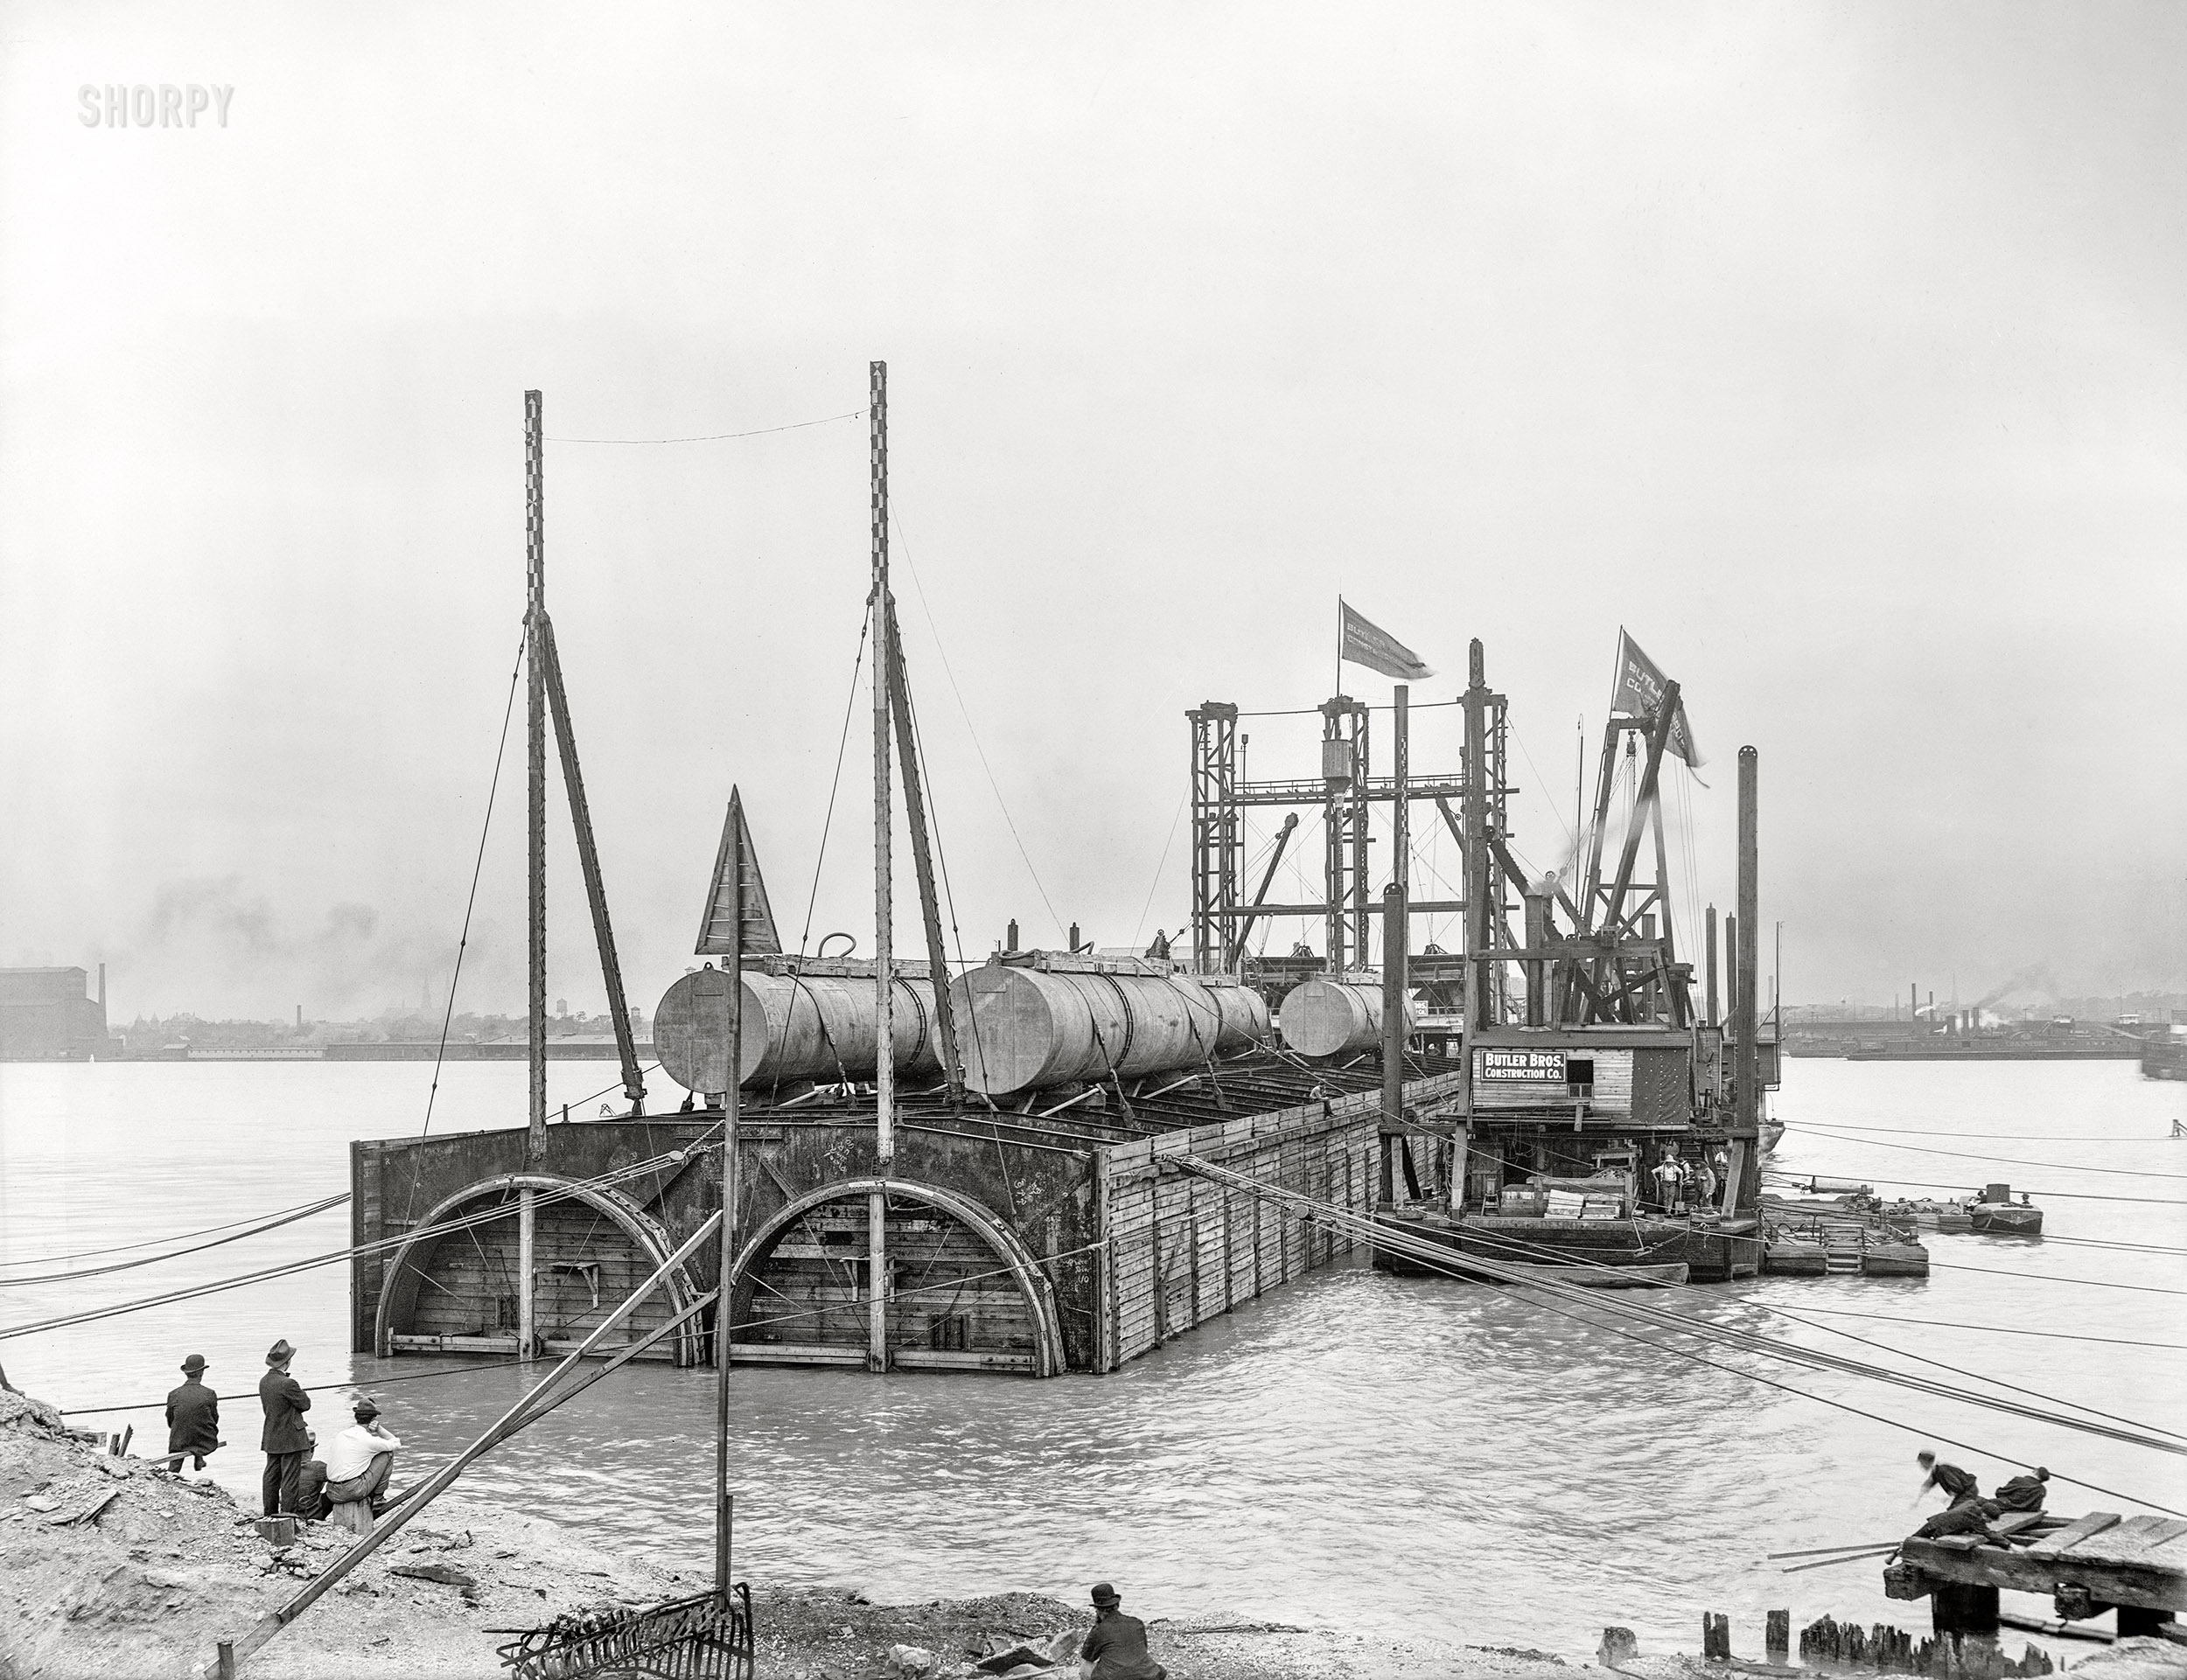 The Detroit River circa 1910. "Michigan Central R.R. tunnel -- sinking the last tubular section. W.S. Kinnear, Chief Engineer, Butler Bros. Construction Co., contractors." 6½ x 8½ inch dry plate glass negative, Detroit Publishing Company. View full size.